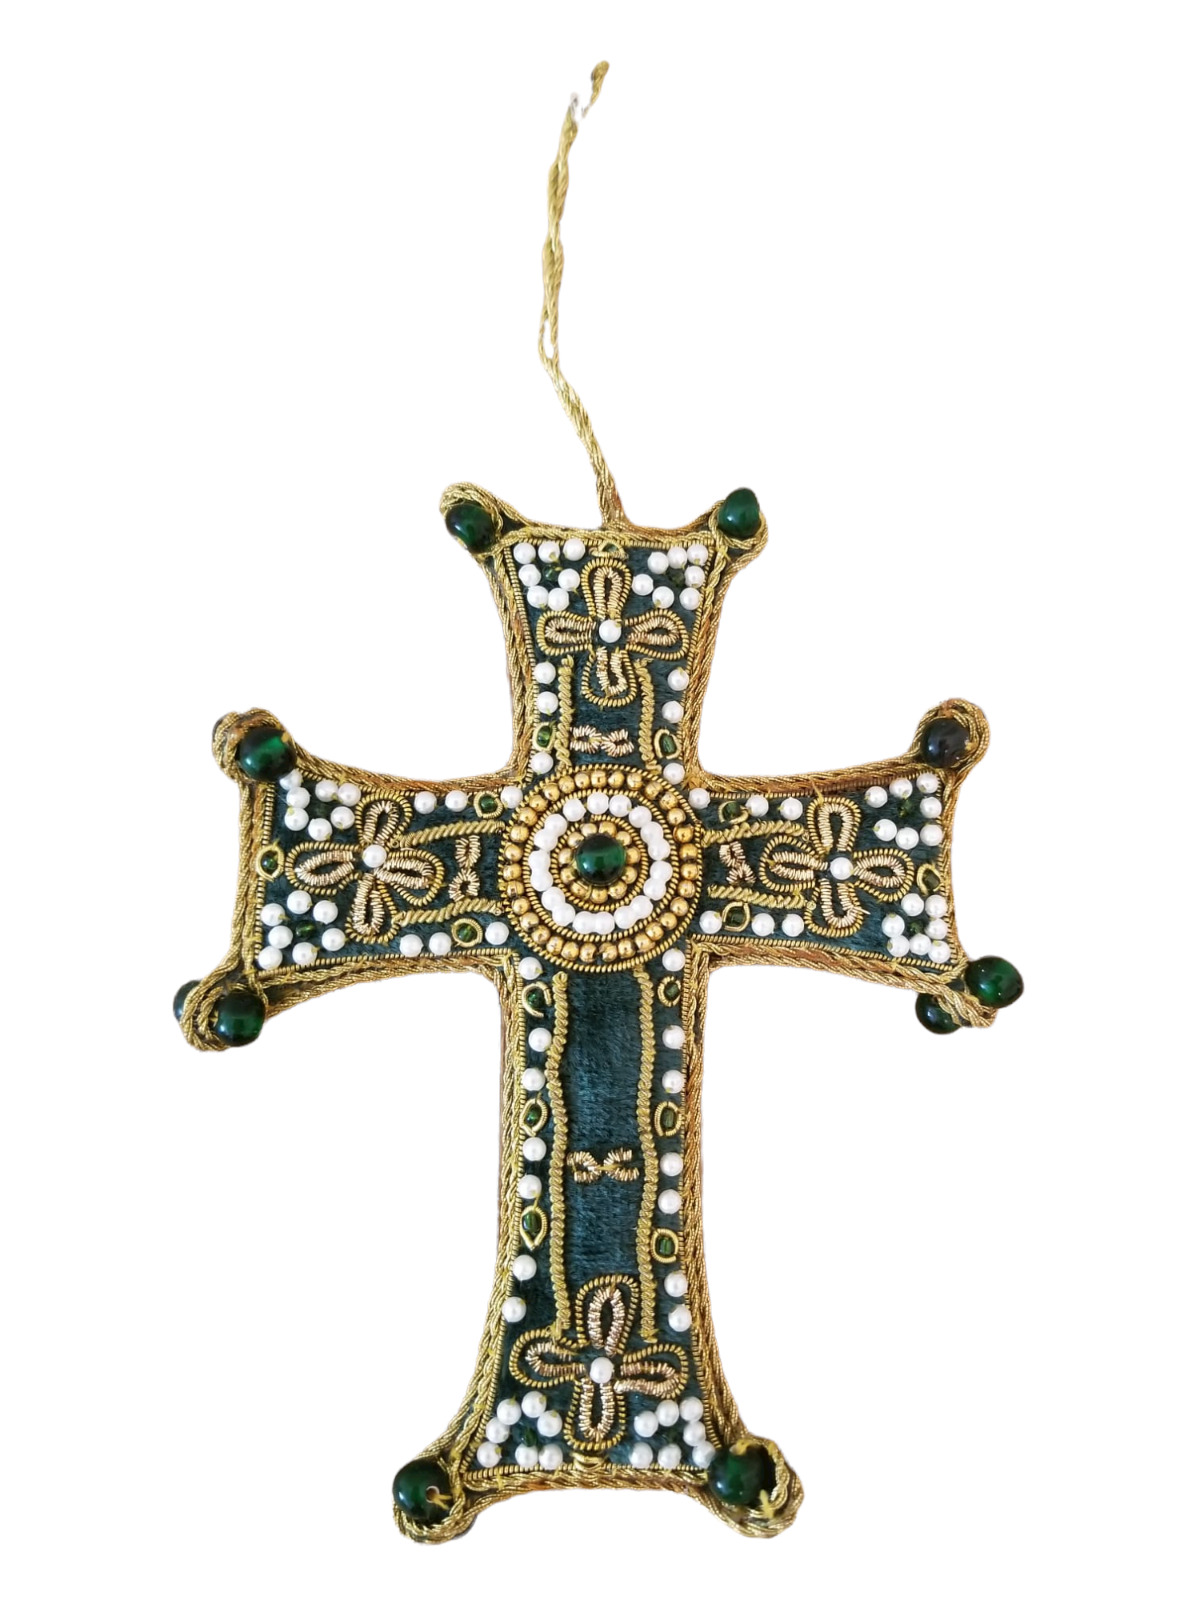 Sacre Coeur Green Gold Cross Esmeralds Wall Hanging Cord Crhristmas Decorative